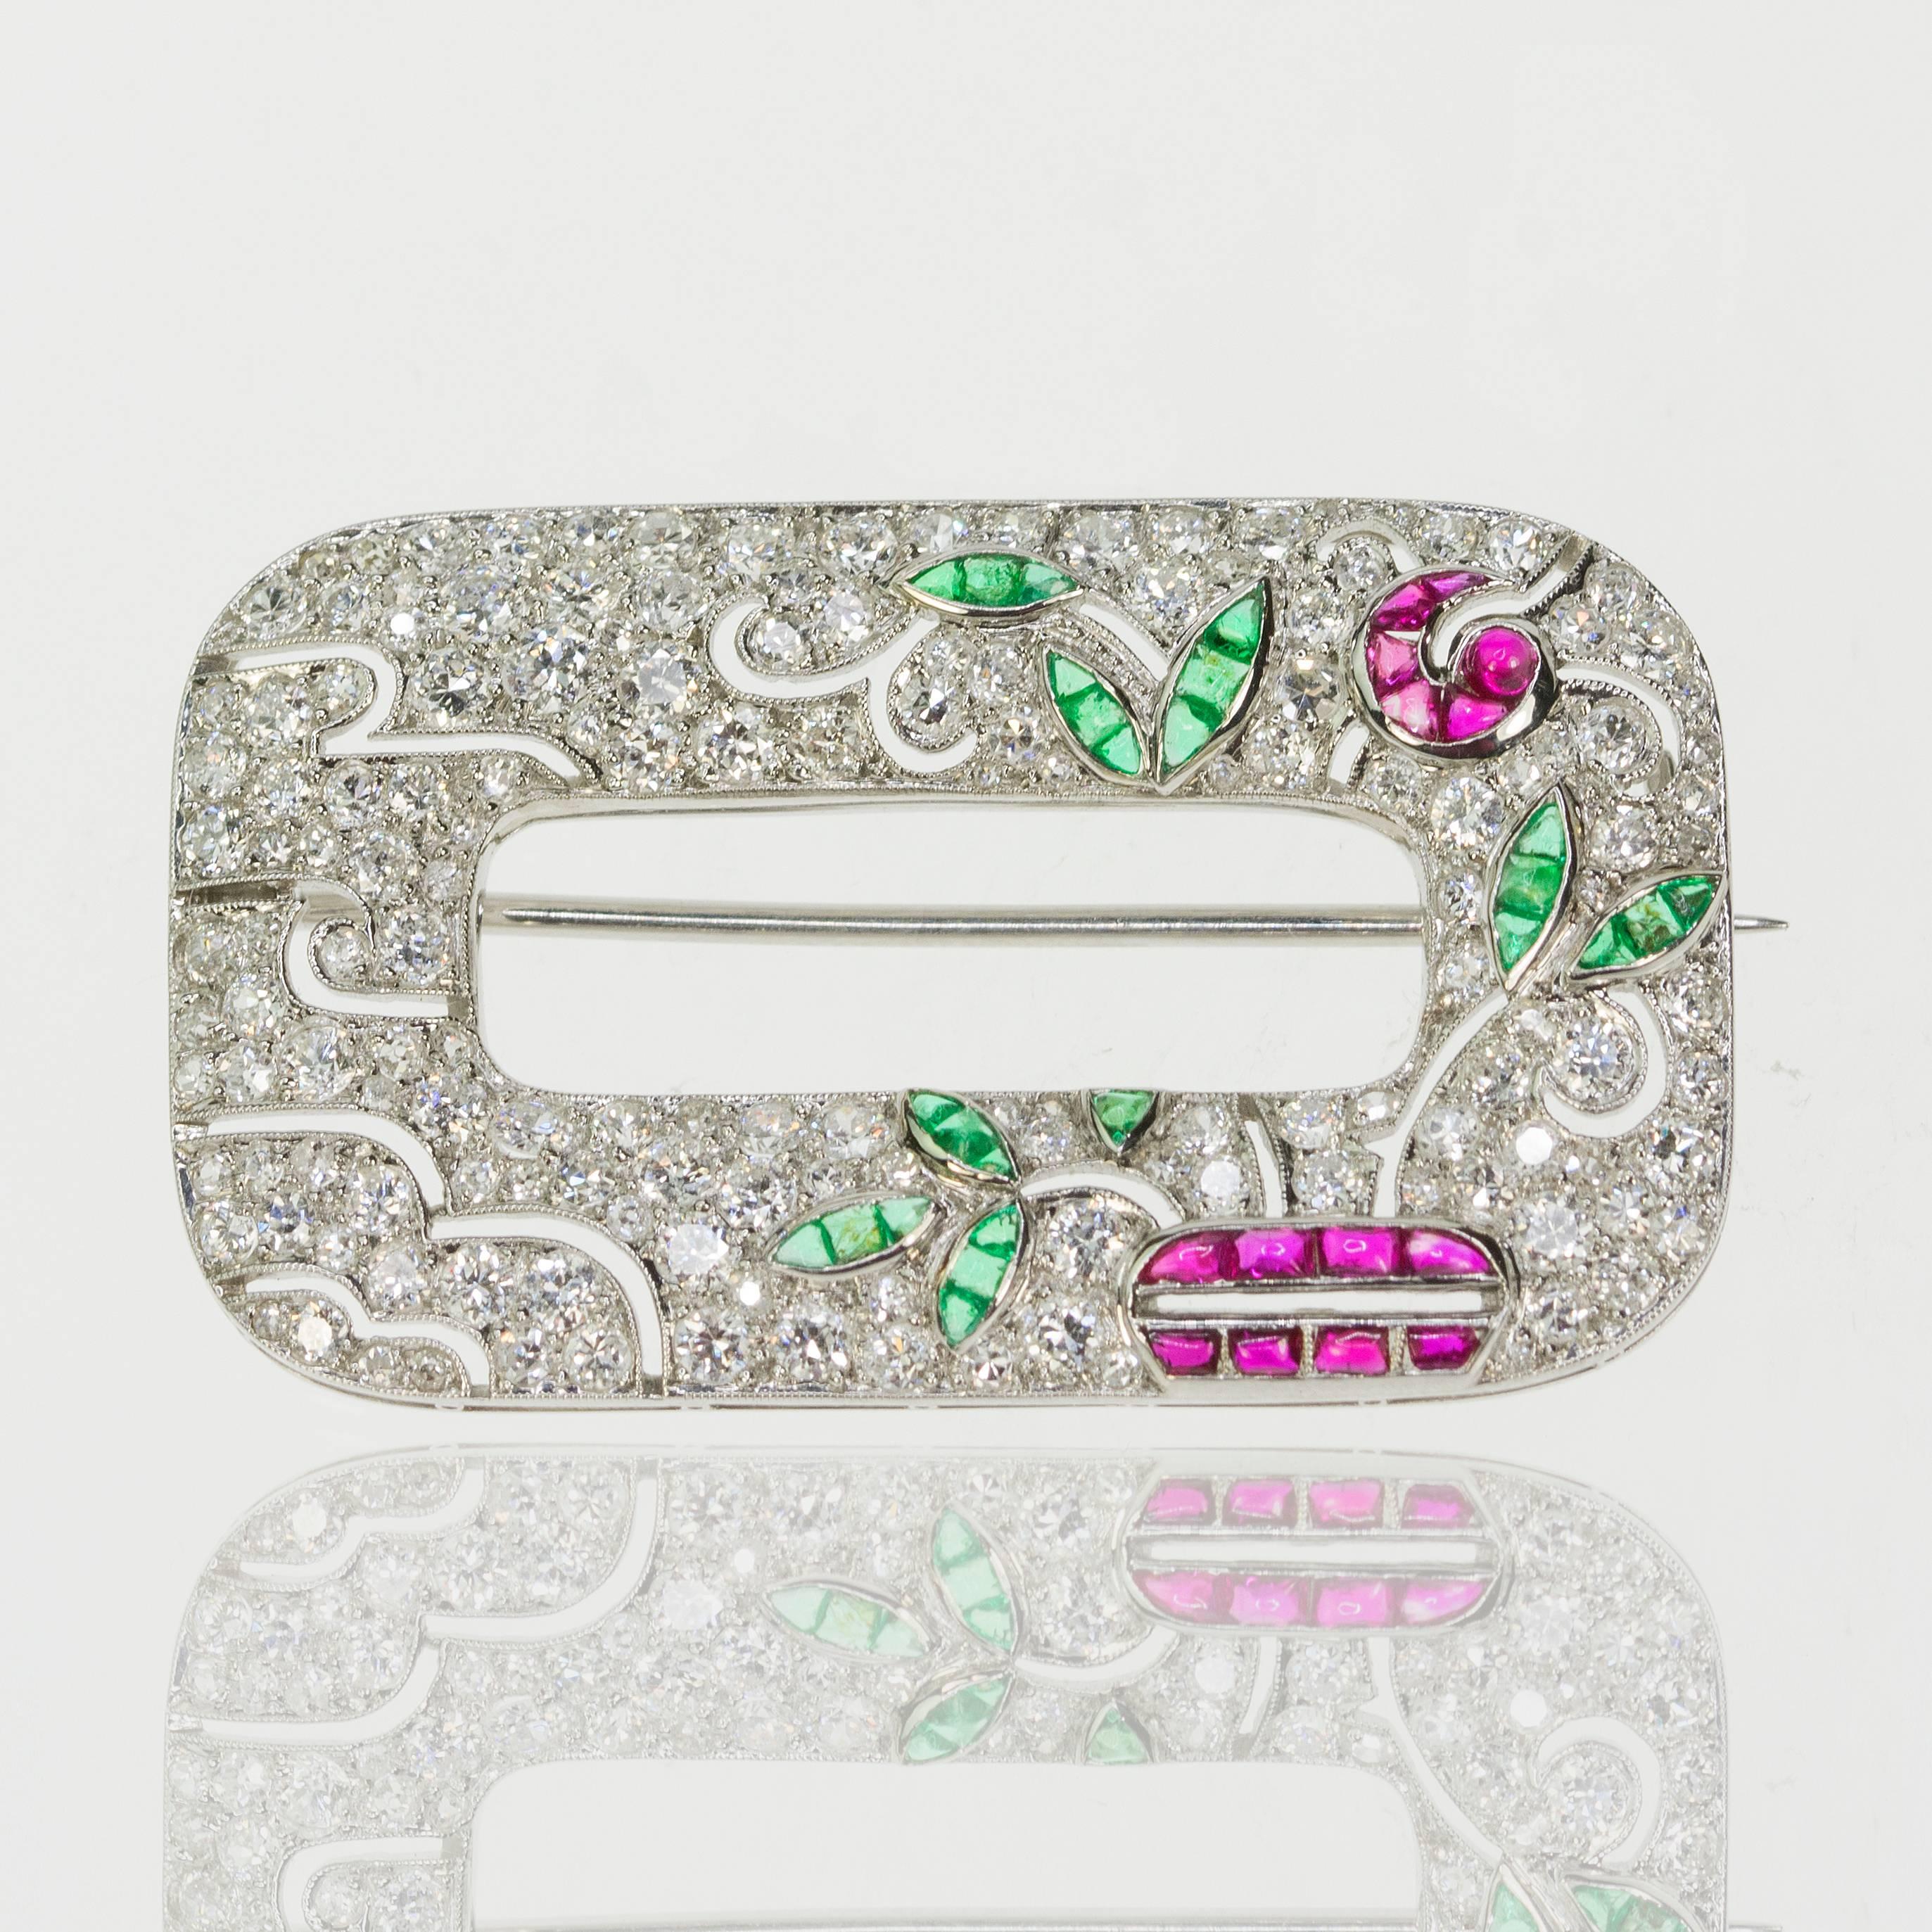 Platinum Art Deco Brooch with approximately 6 carats of fine diamonds, rubies & emeralds 